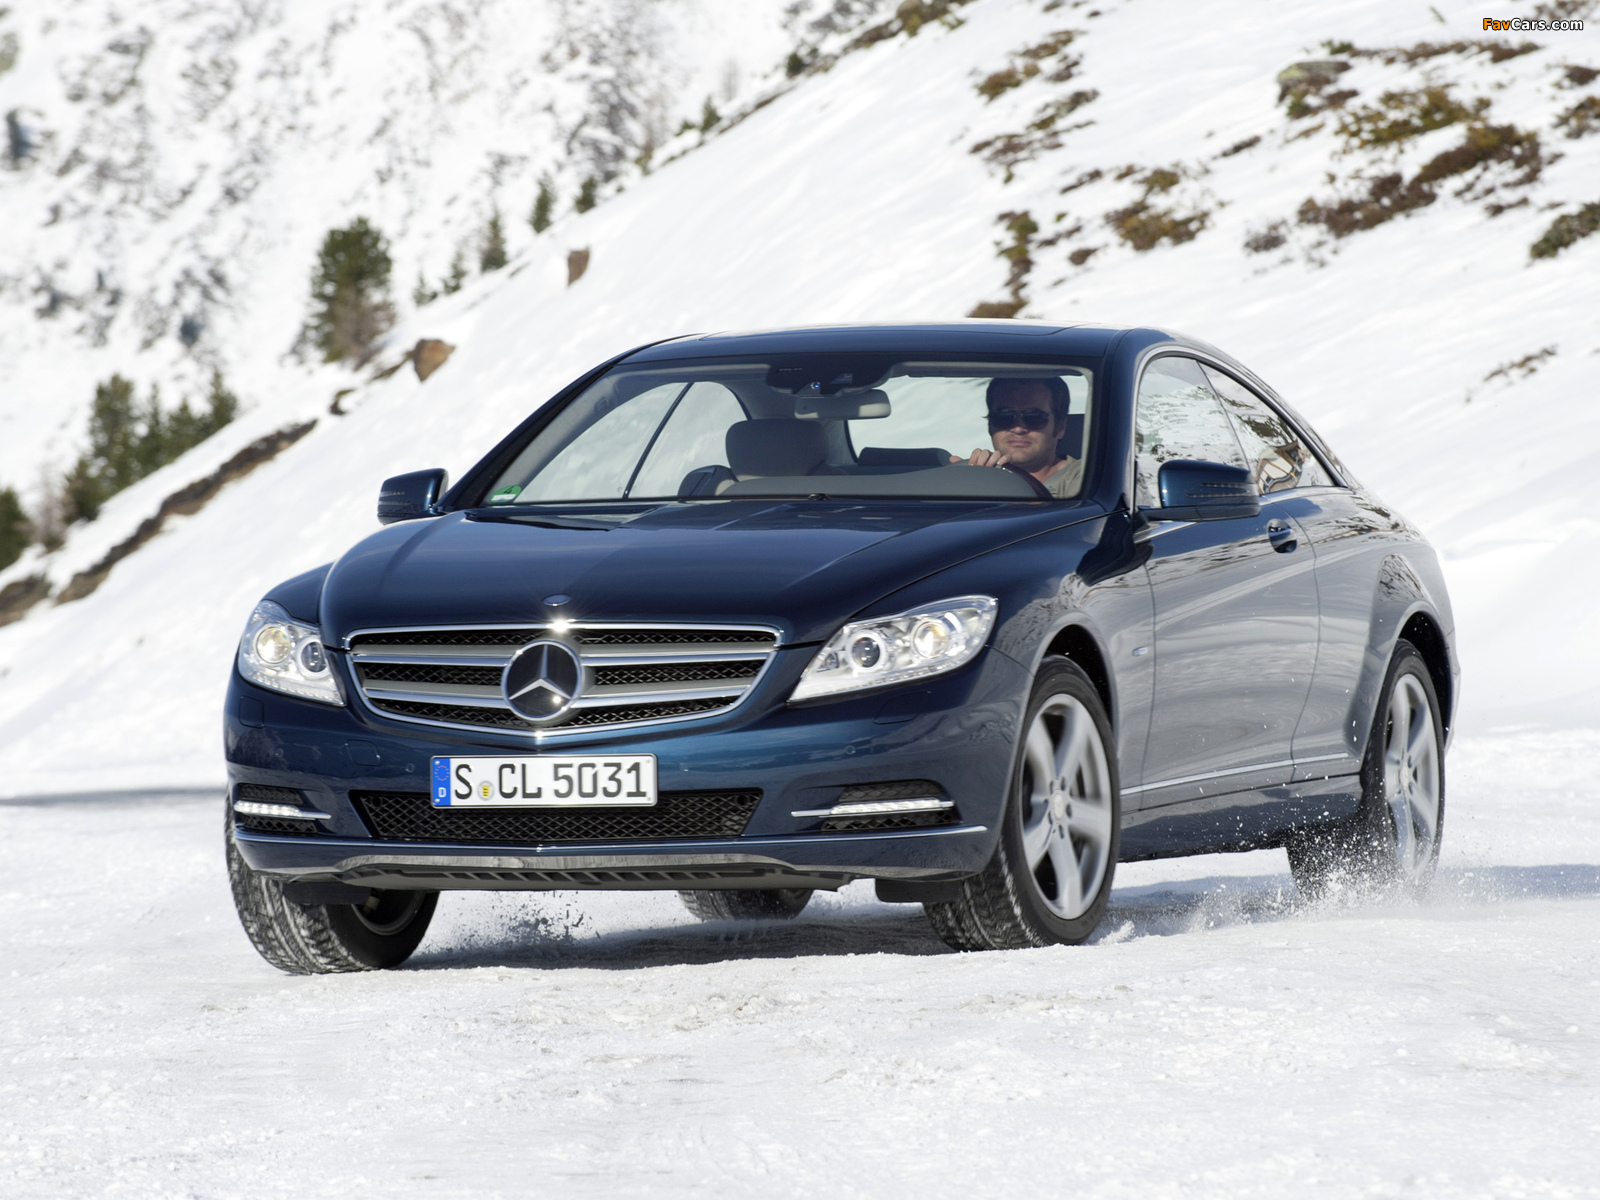 Mercedes-Benz CL 500 4MATIC (S216) 2010 pictures (1600 x 1200)